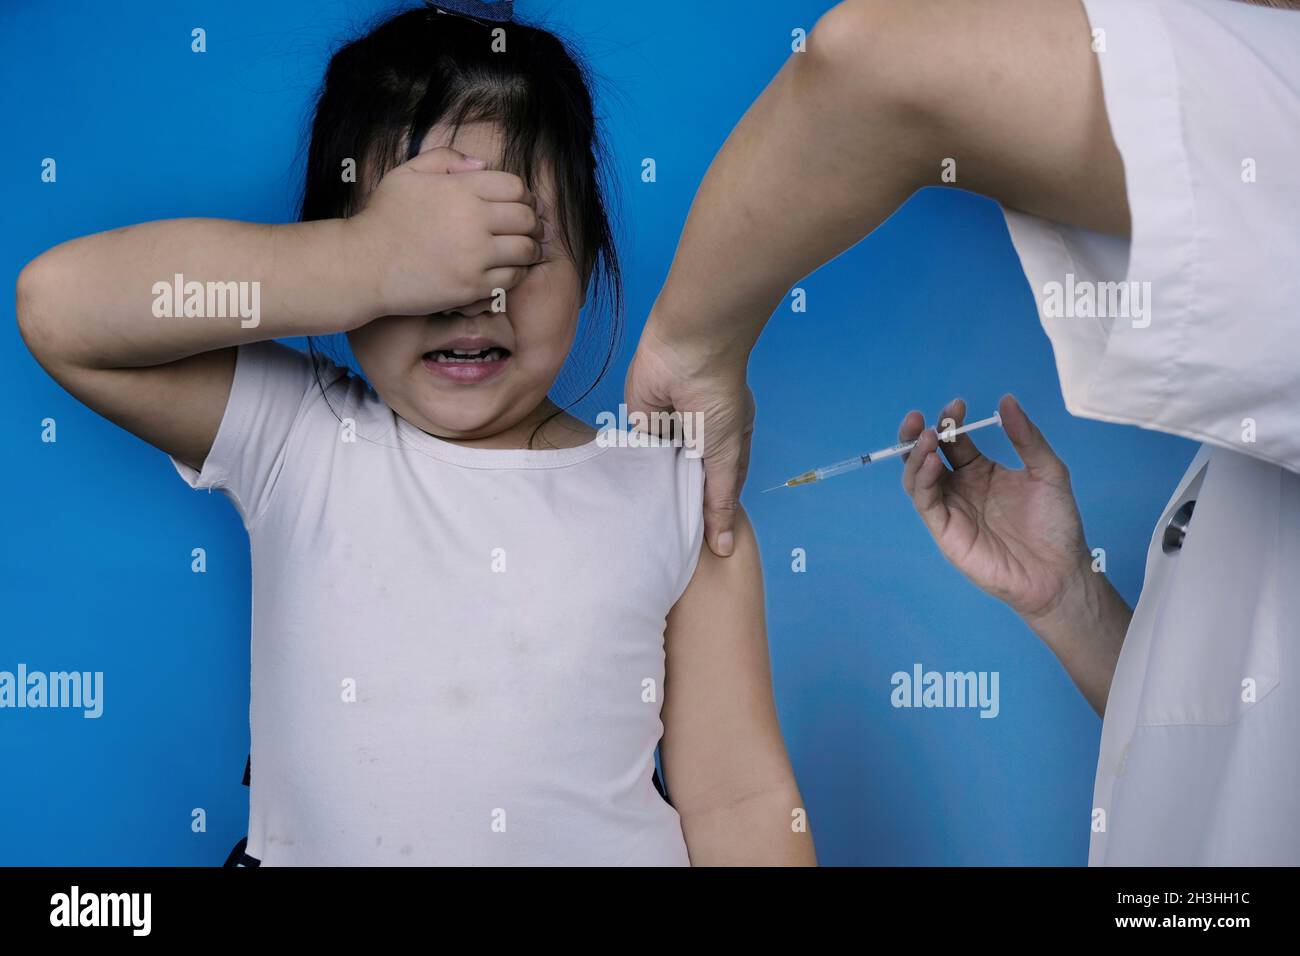 Little kid terrified by injection at the hospital. Girl afraid of syringe needle covers face while getting flu vaccine at pediatric clinic. Blue backg Stock Photo